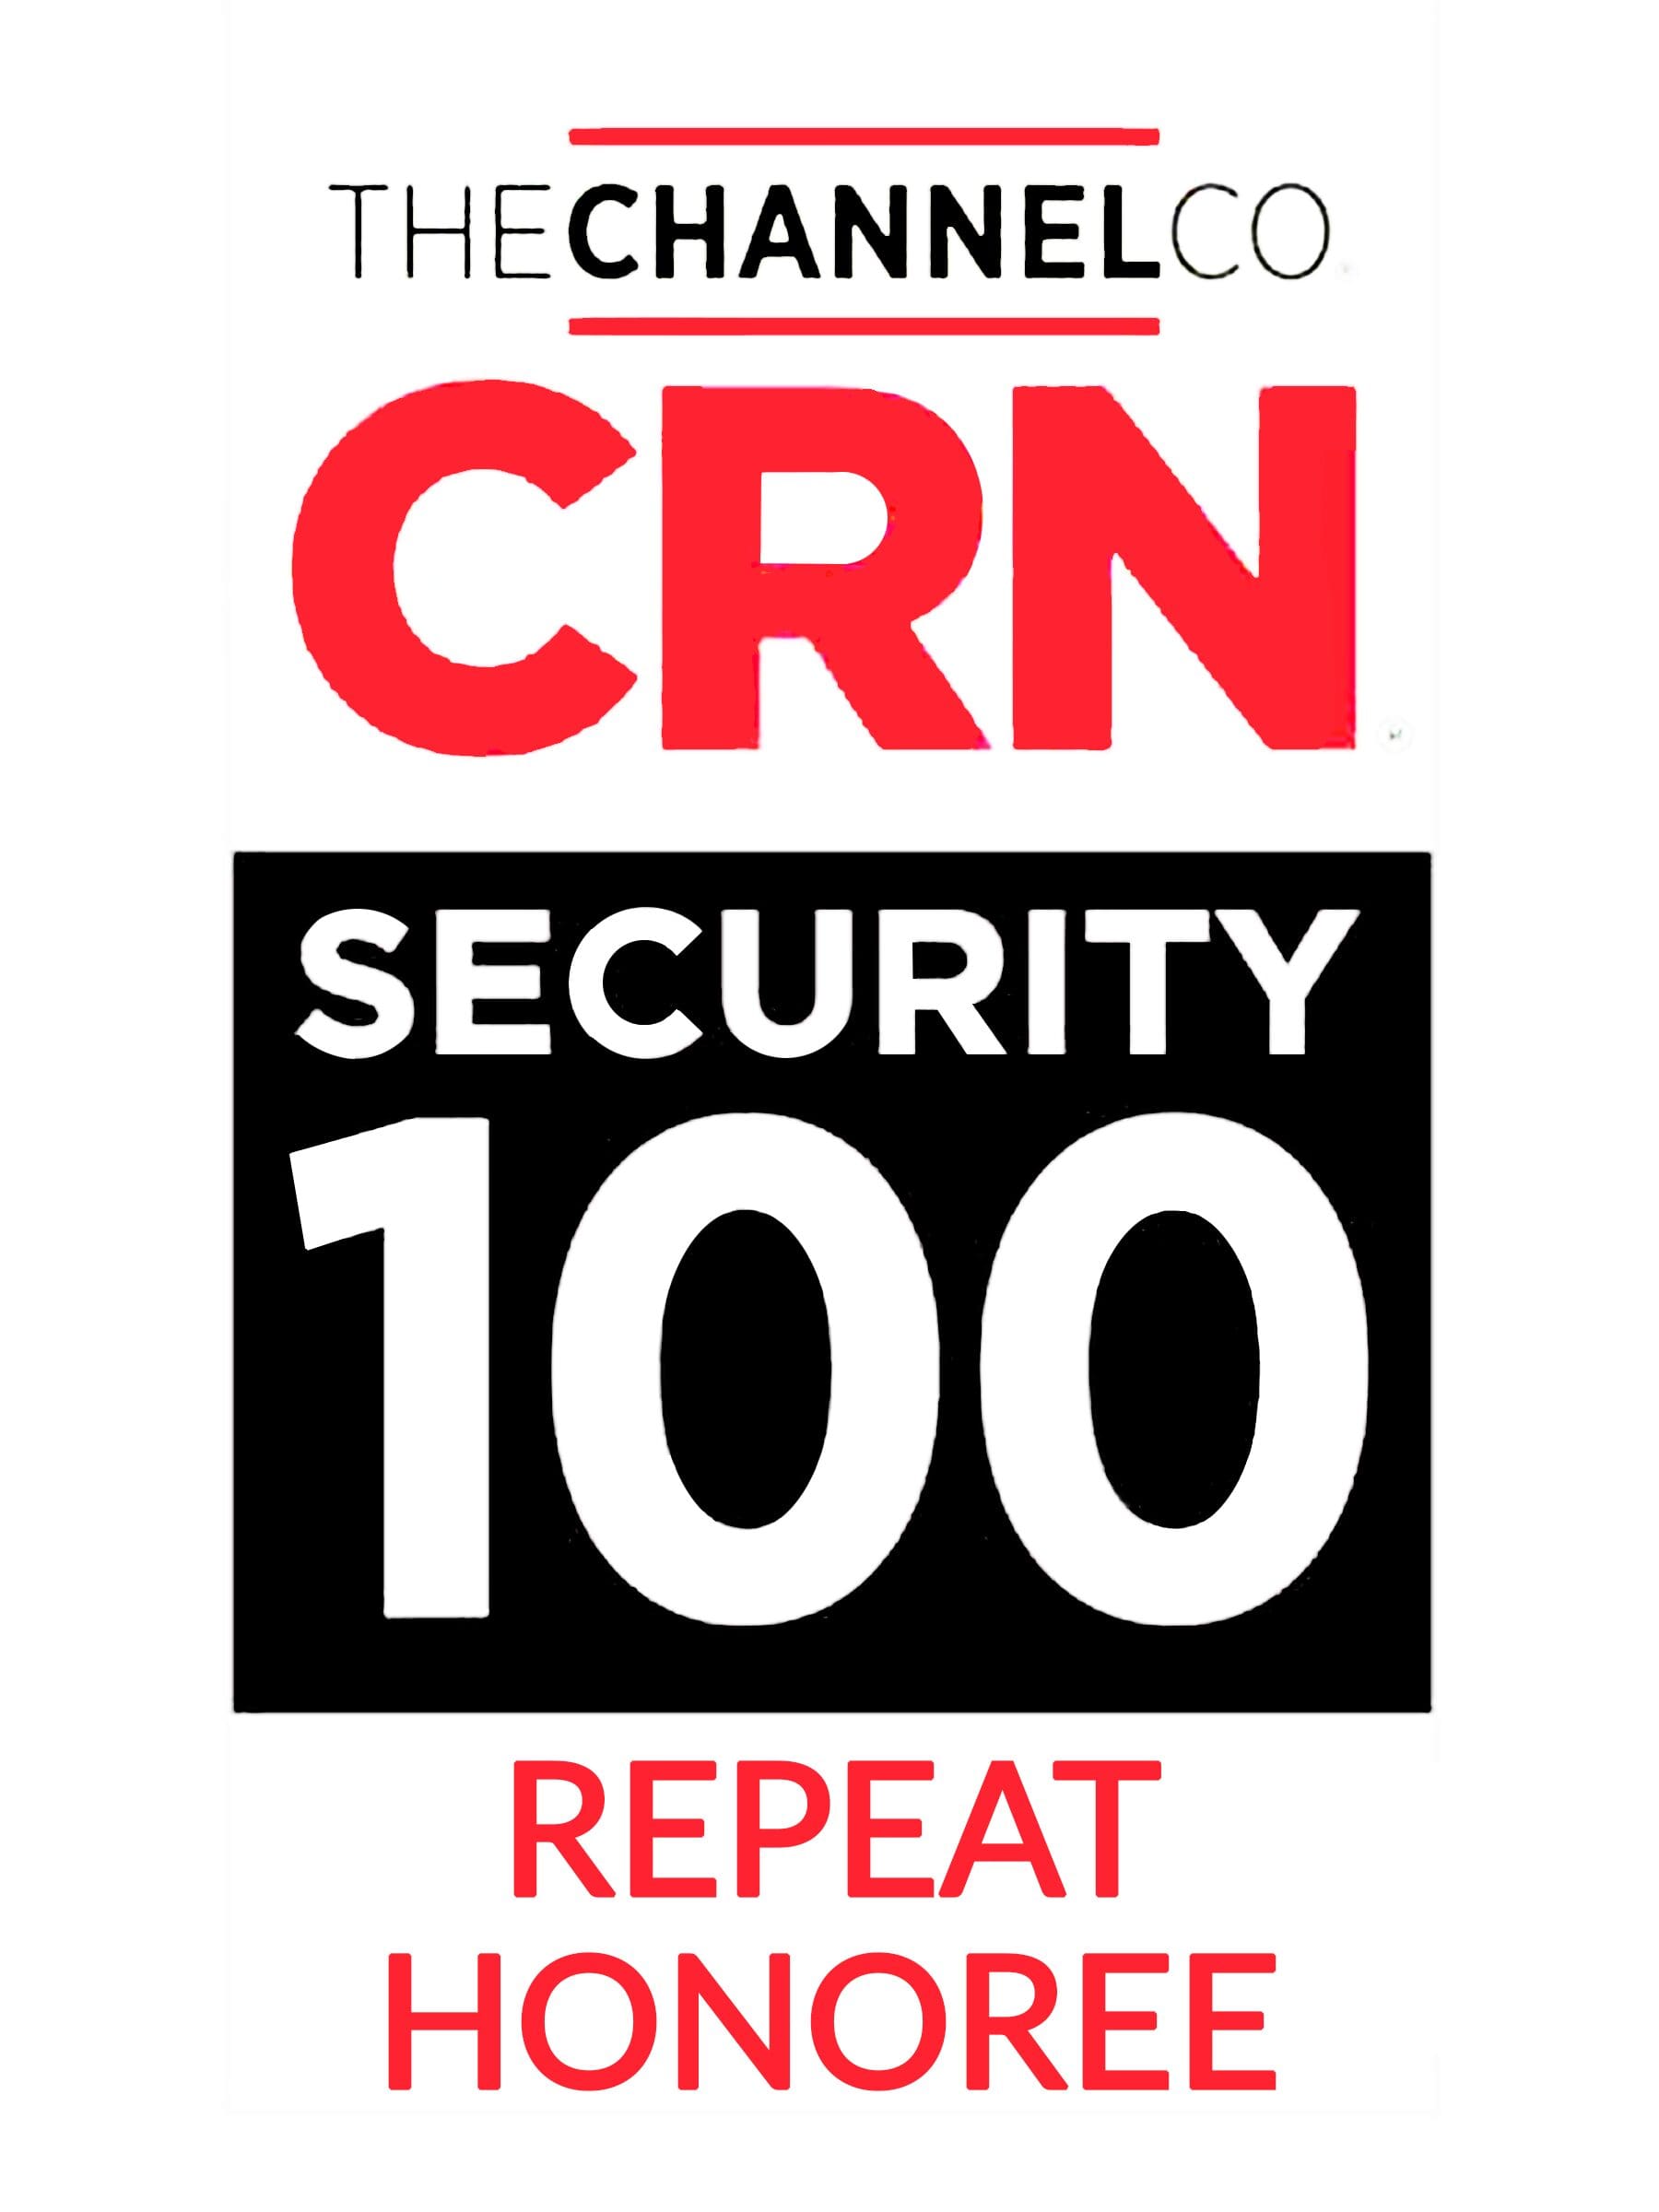 CRN Security 100 seal